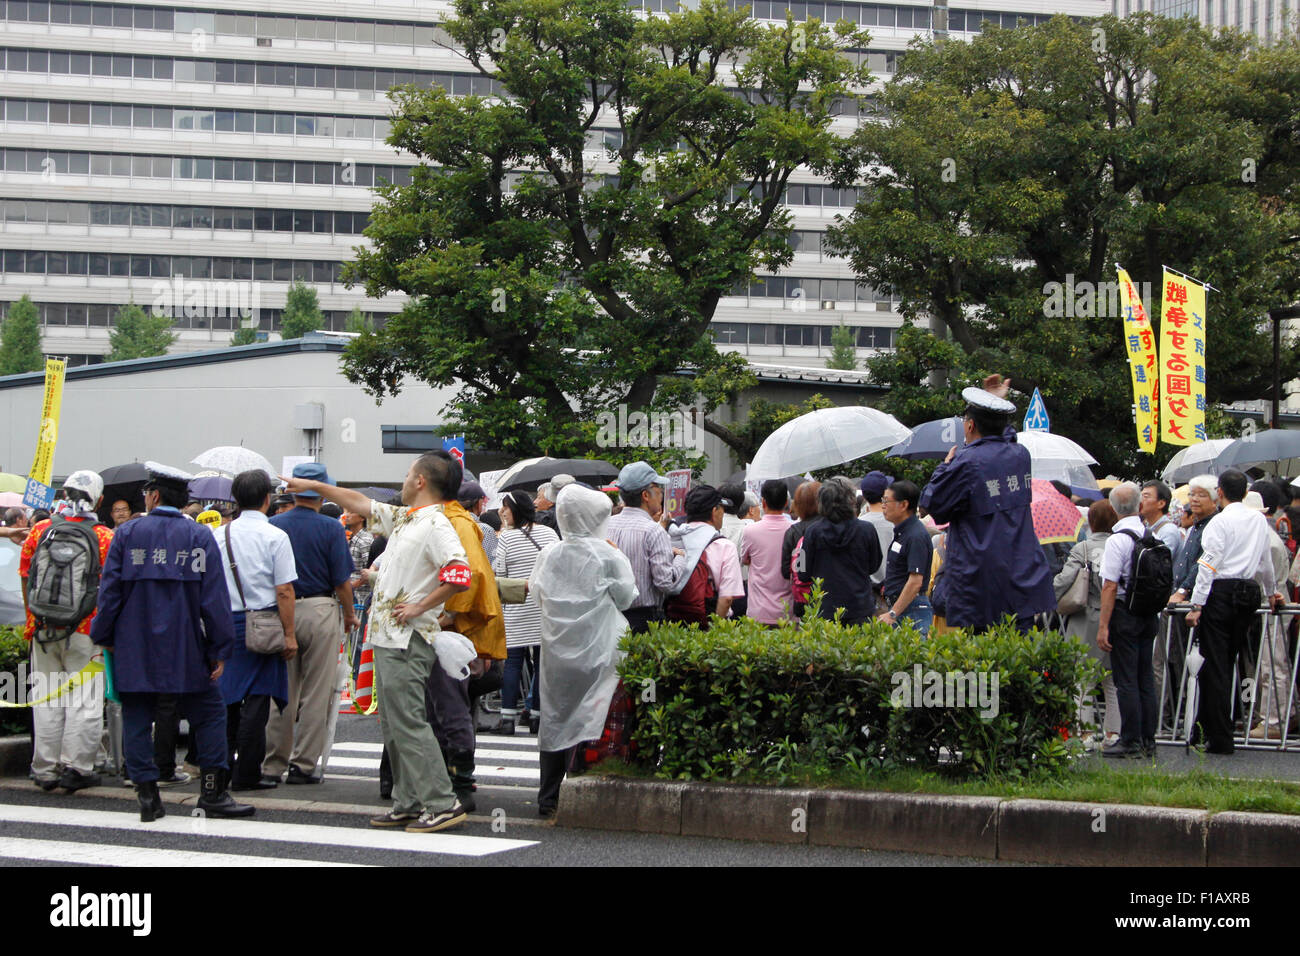 Tokyo, Japan. 30th August, 2015. Tens of thousands of people gathered around the Diet building to protest military legislation allowing the military to fight overseas. Stock Photo